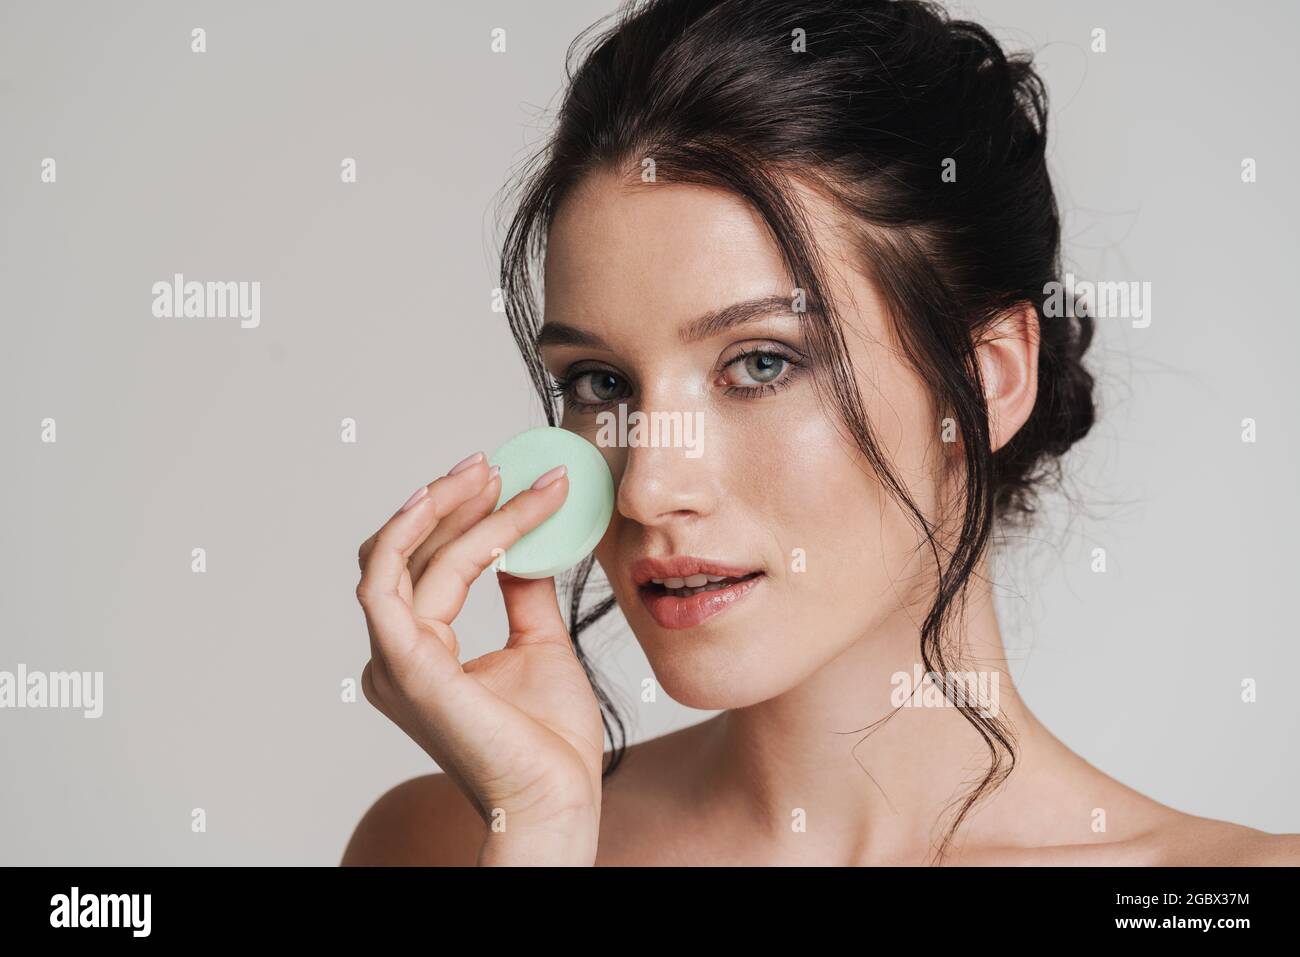 Young white woman with brown hair pulled up applying makeup using beauty blender sponge isolated over gray background Stock Photo